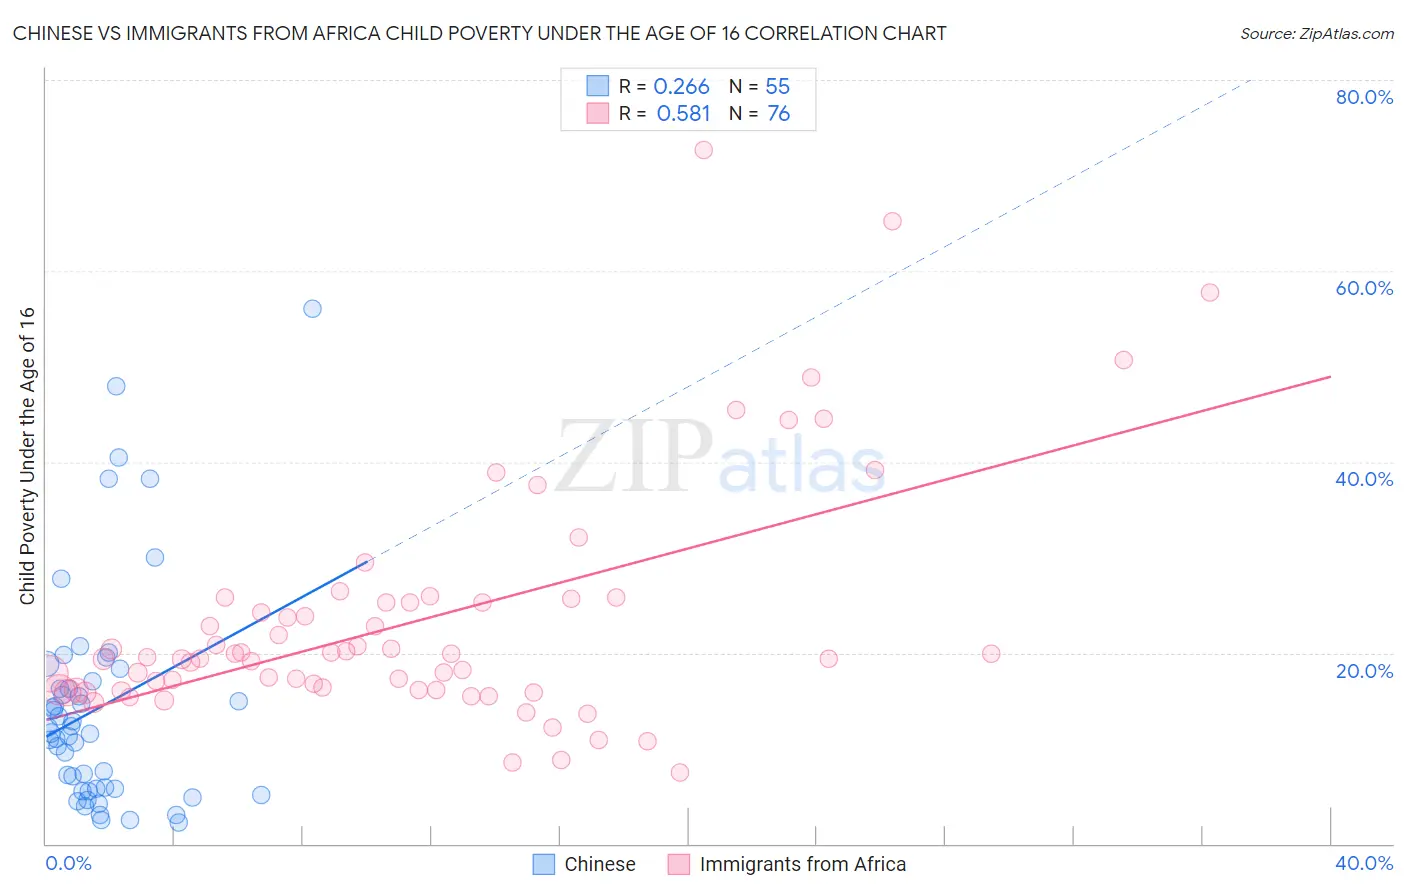 Chinese vs Immigrants from Africa Child Poverty Under the Age of 16